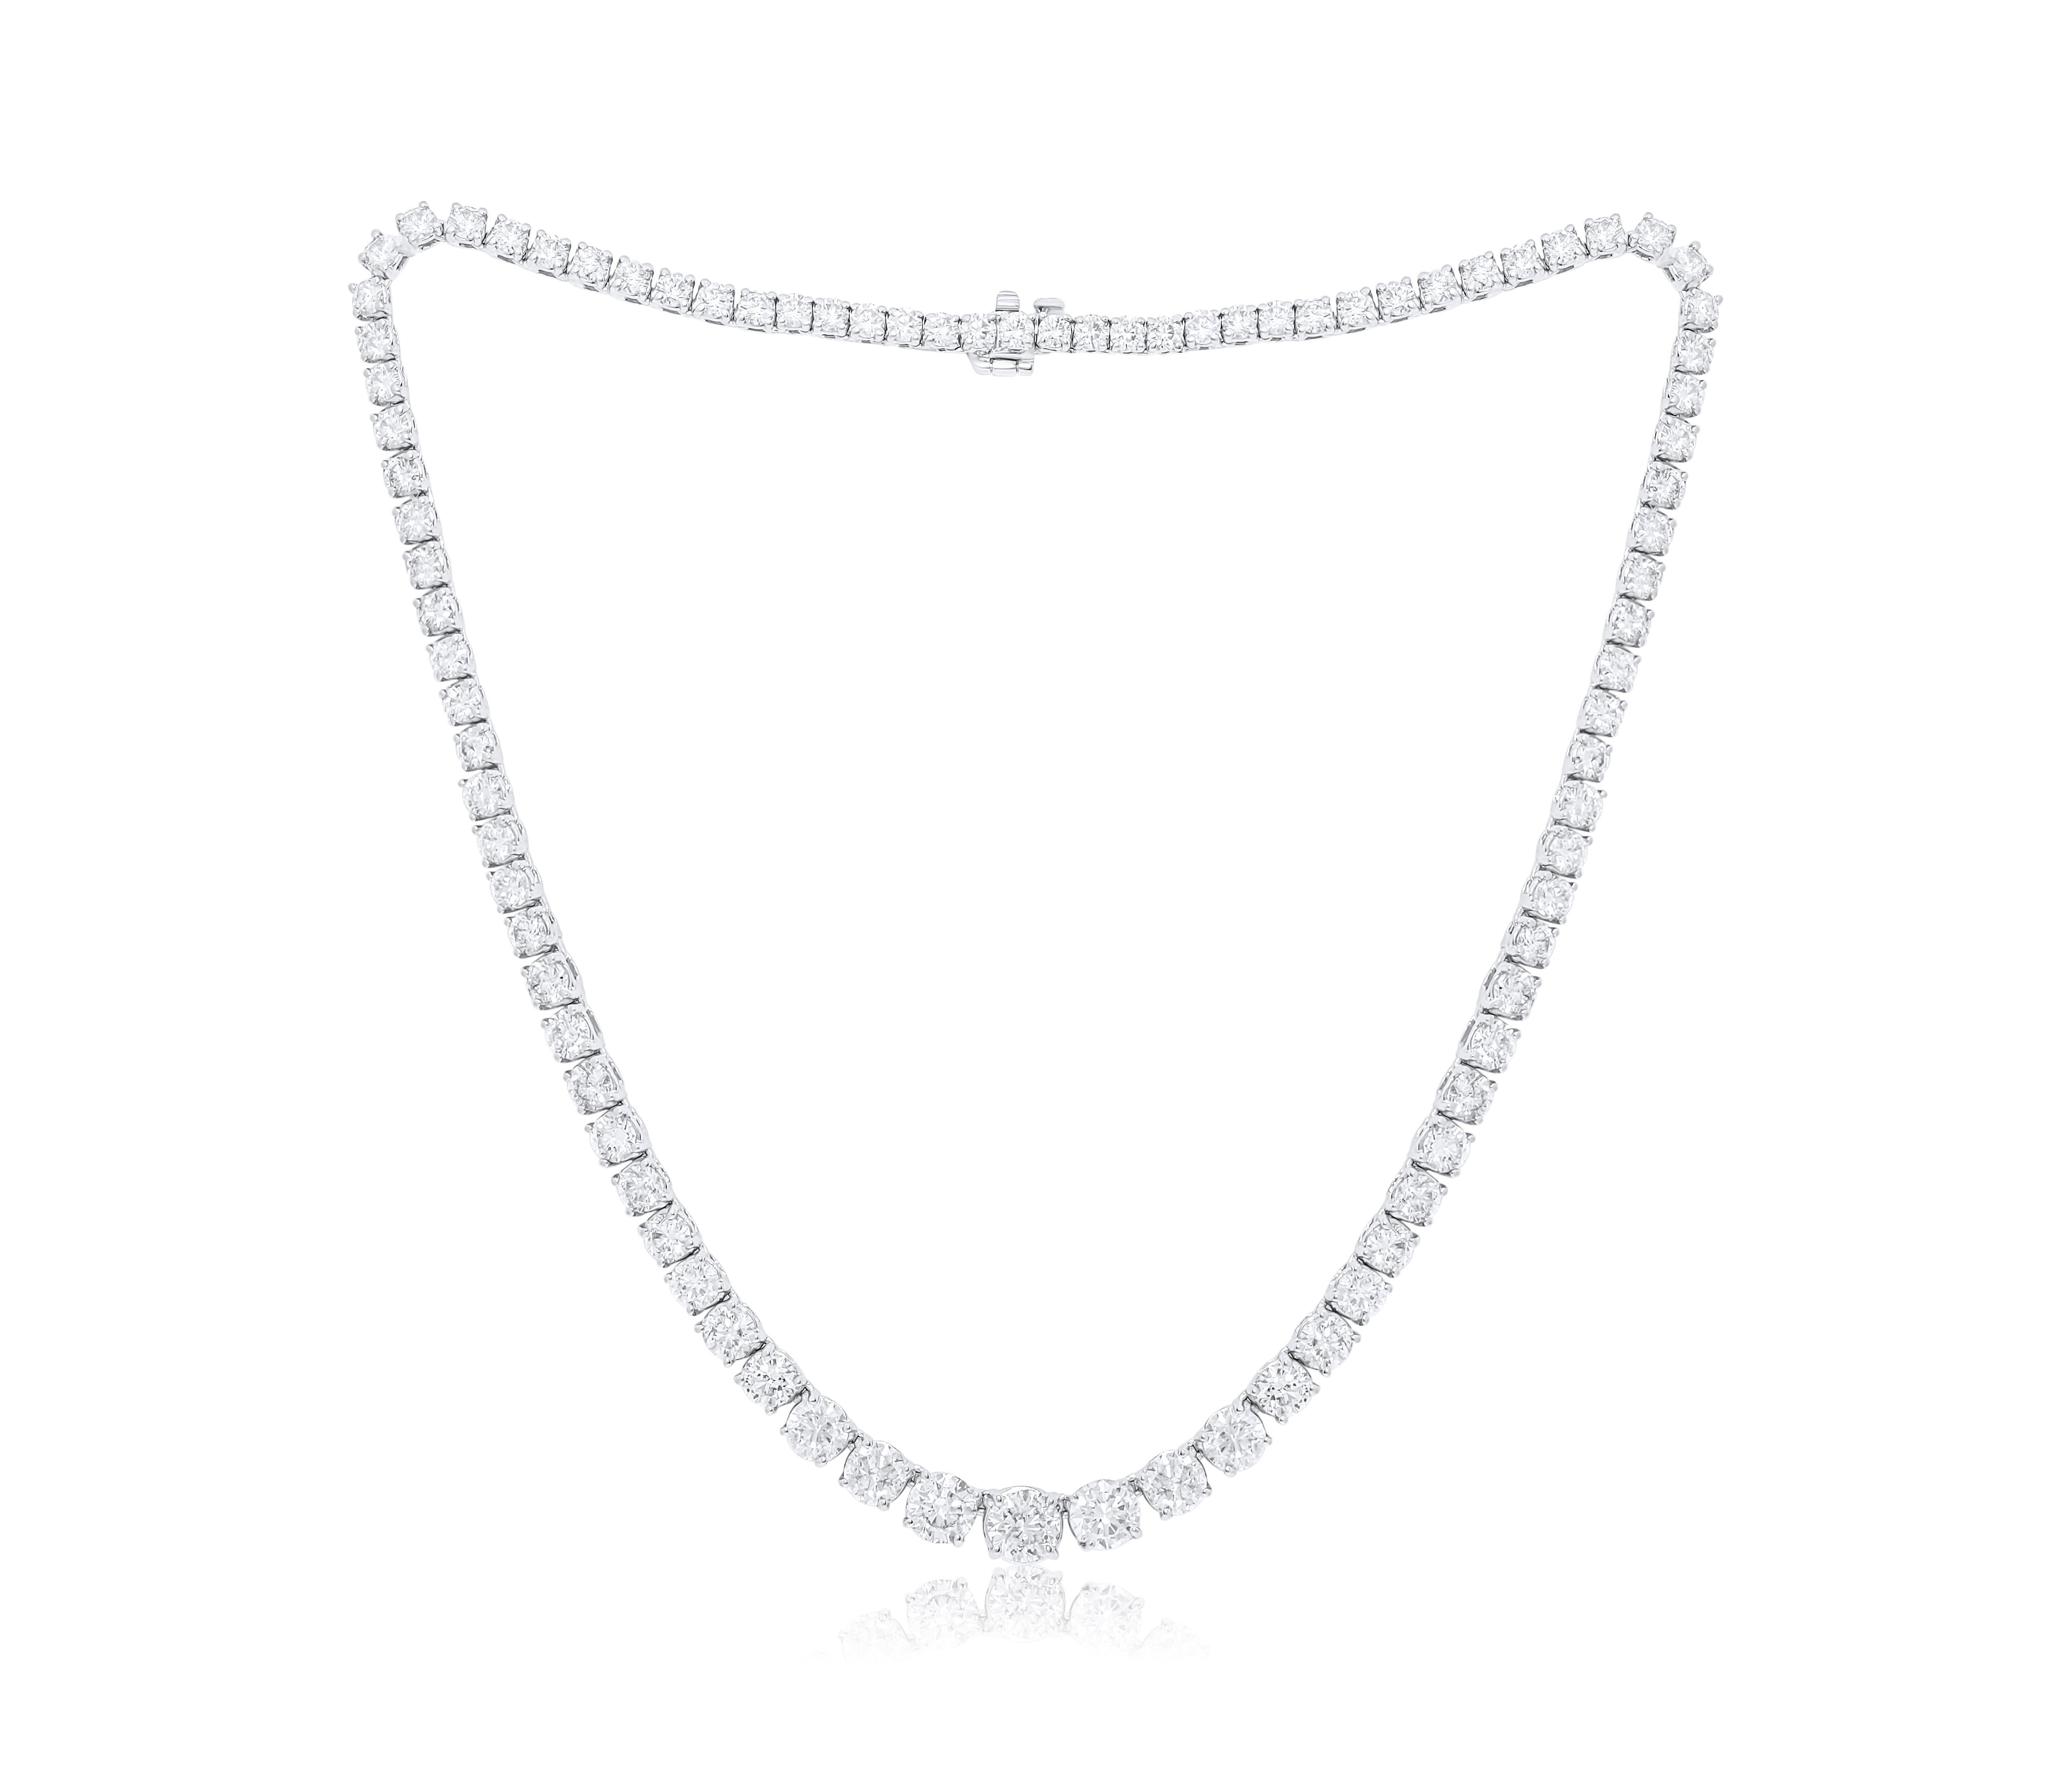 Custom 18k white gold graduated tennis necklace featuring 26.00 cts of round brilliant diamonds set in a 4 prong setting 89 stones 0.29 each  FG color SI clarity. Excellent  cut. 
